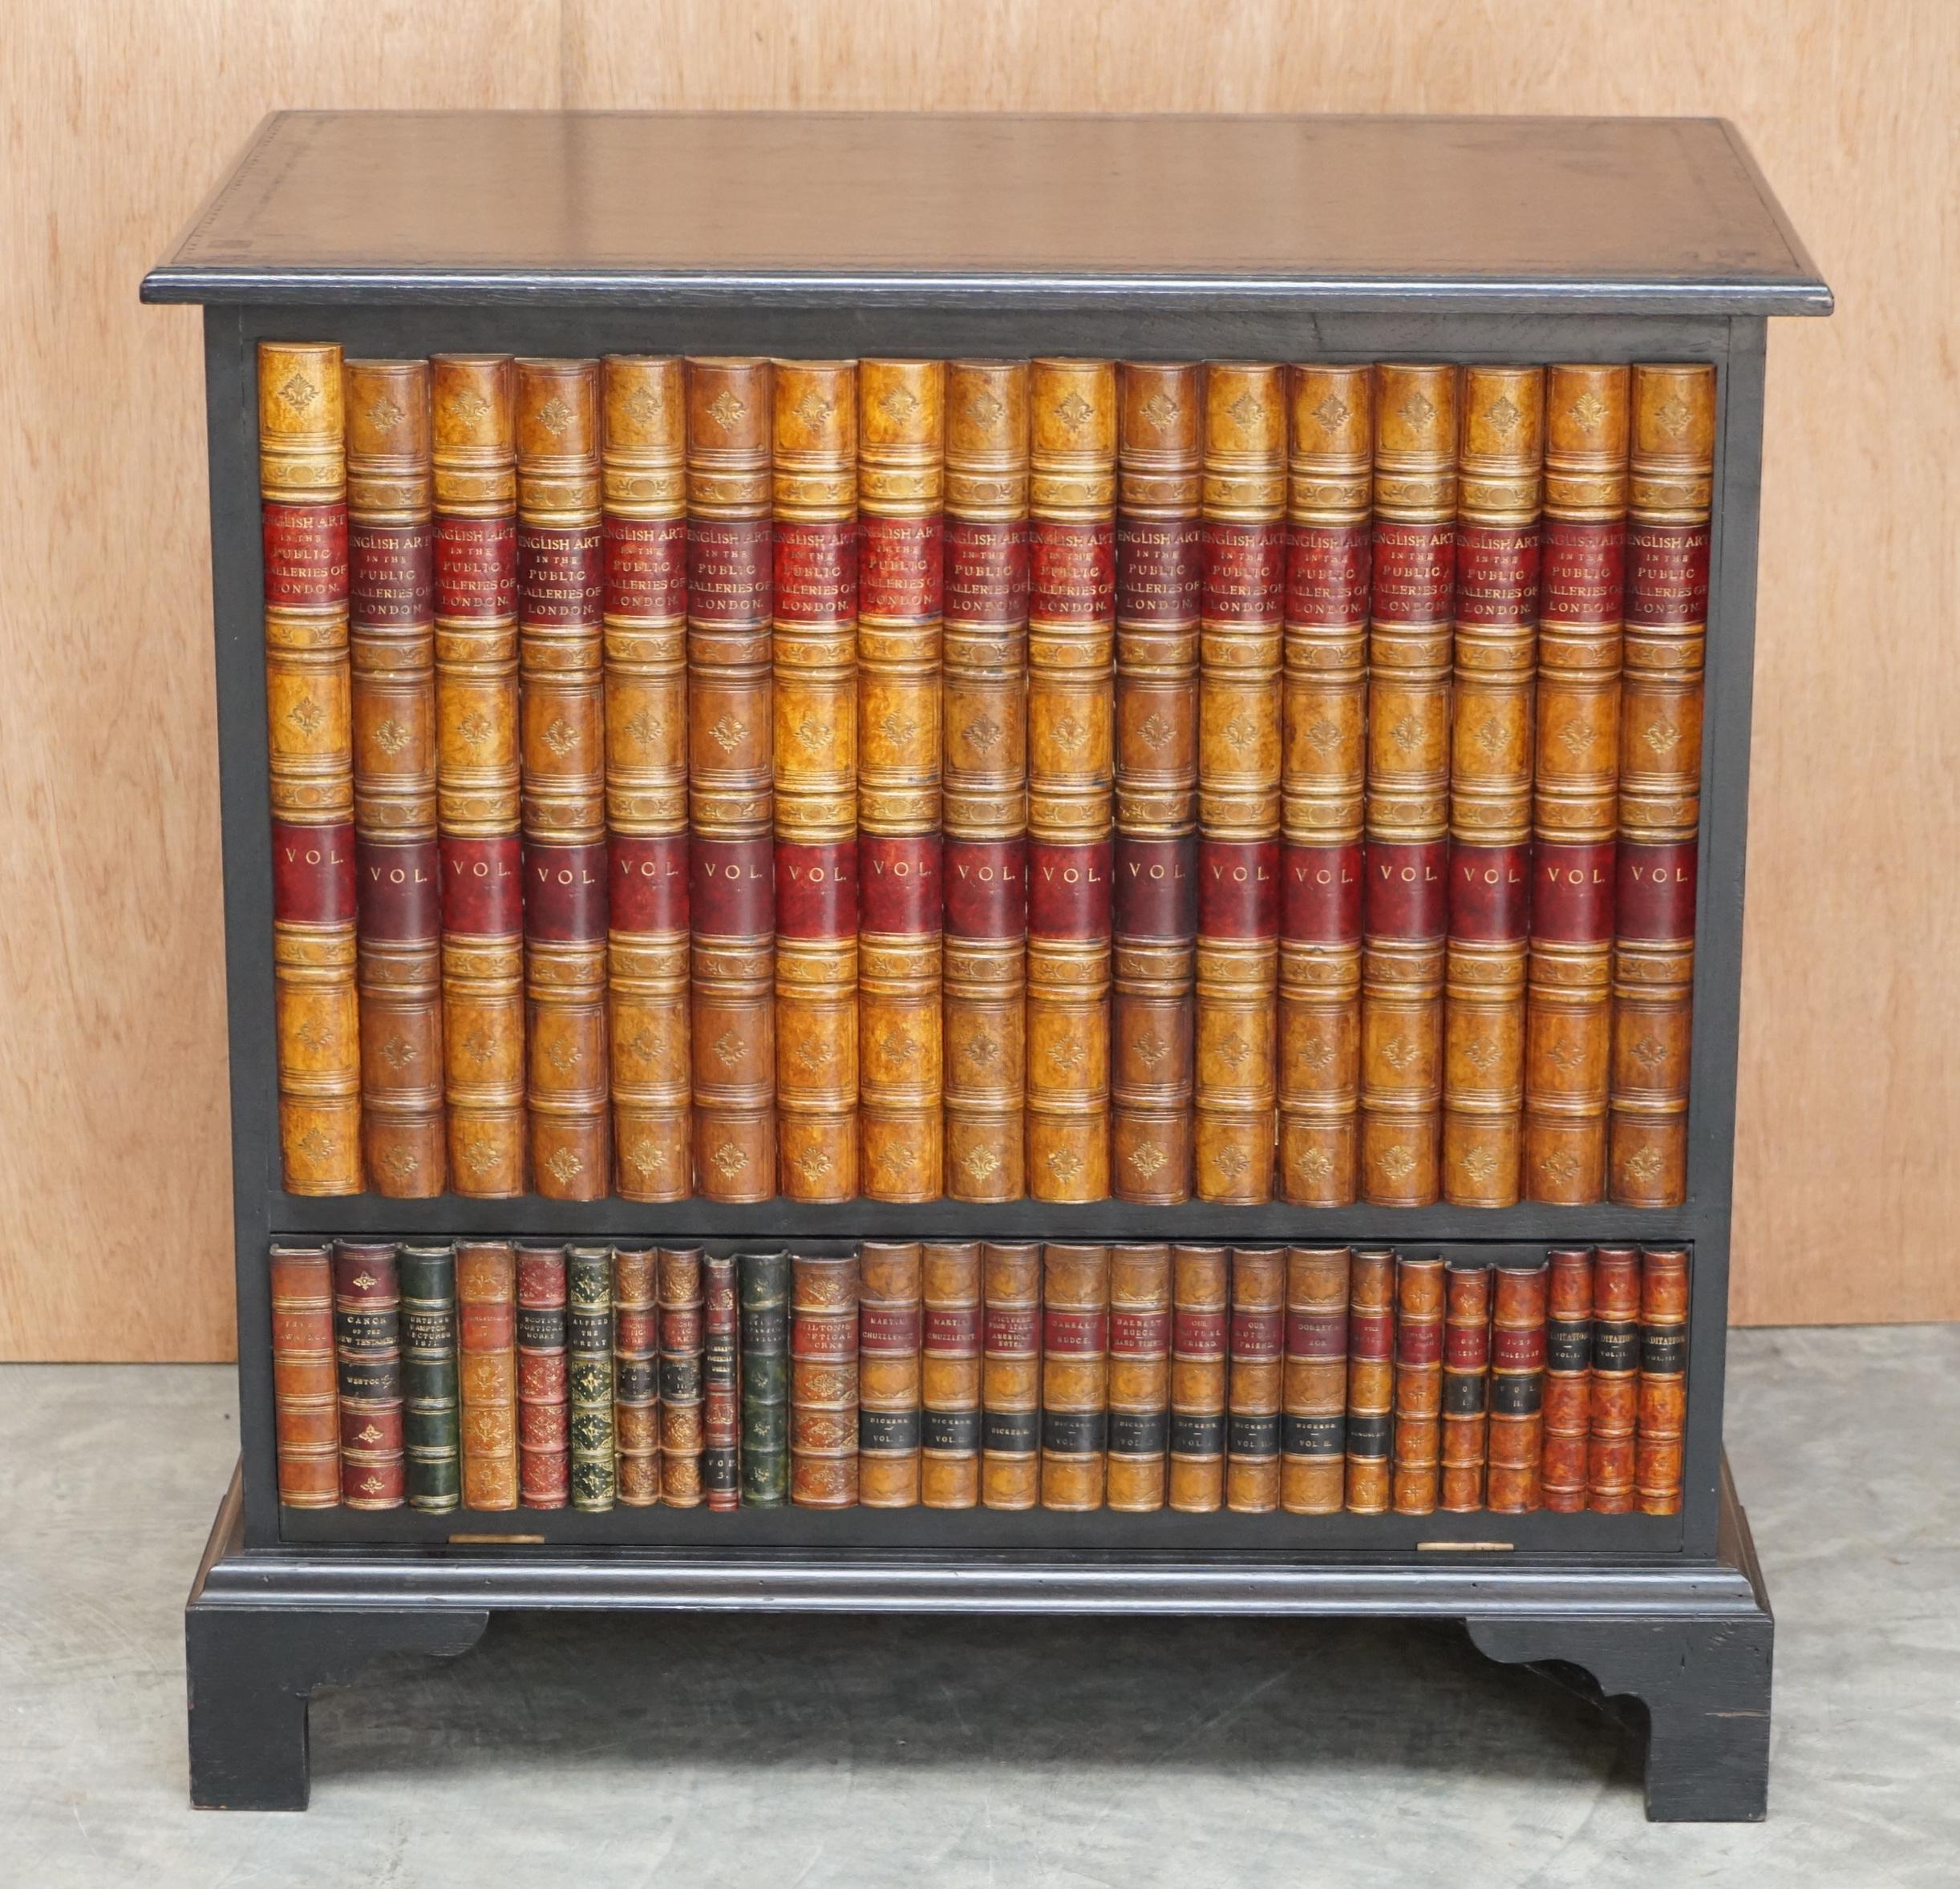 We are delighted to offer for sale this lovely faux book fronted “The Hidden TV Company” television stand or media cupboard

A very good looking piece, the faux book front is one of my favourite frontages, they actually date back to the early